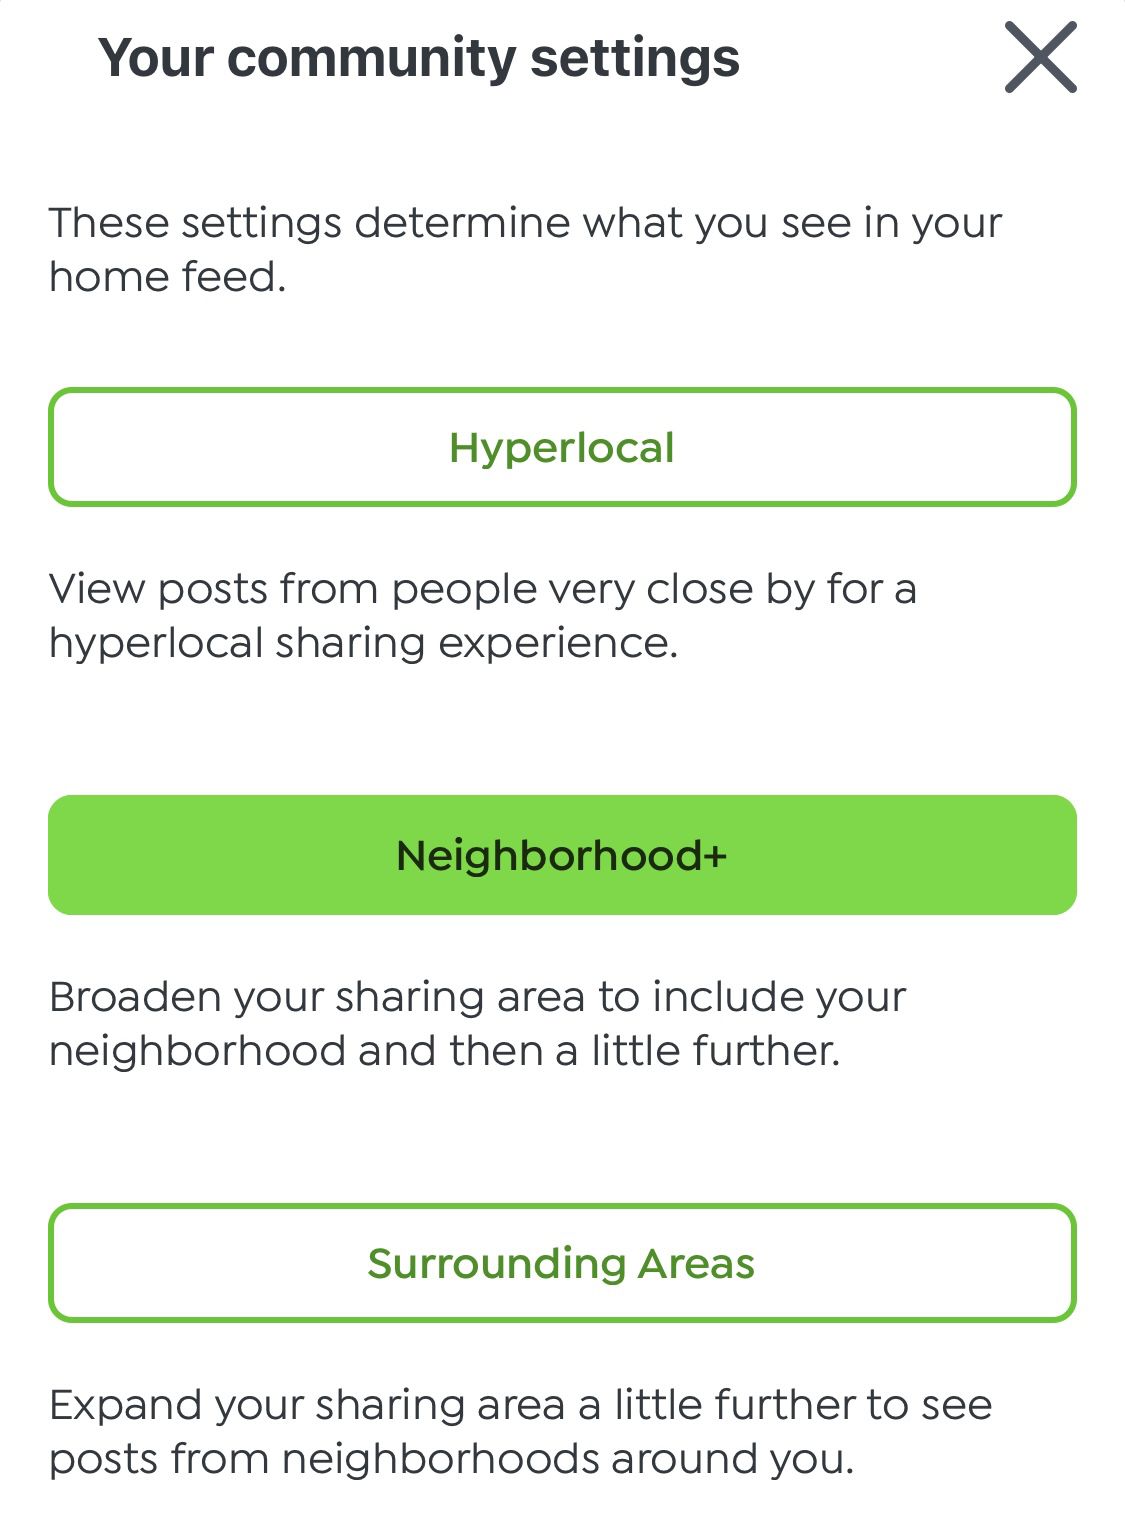 The app presents three distance settings for users from “hyperlocal” to “surrounding areas.”